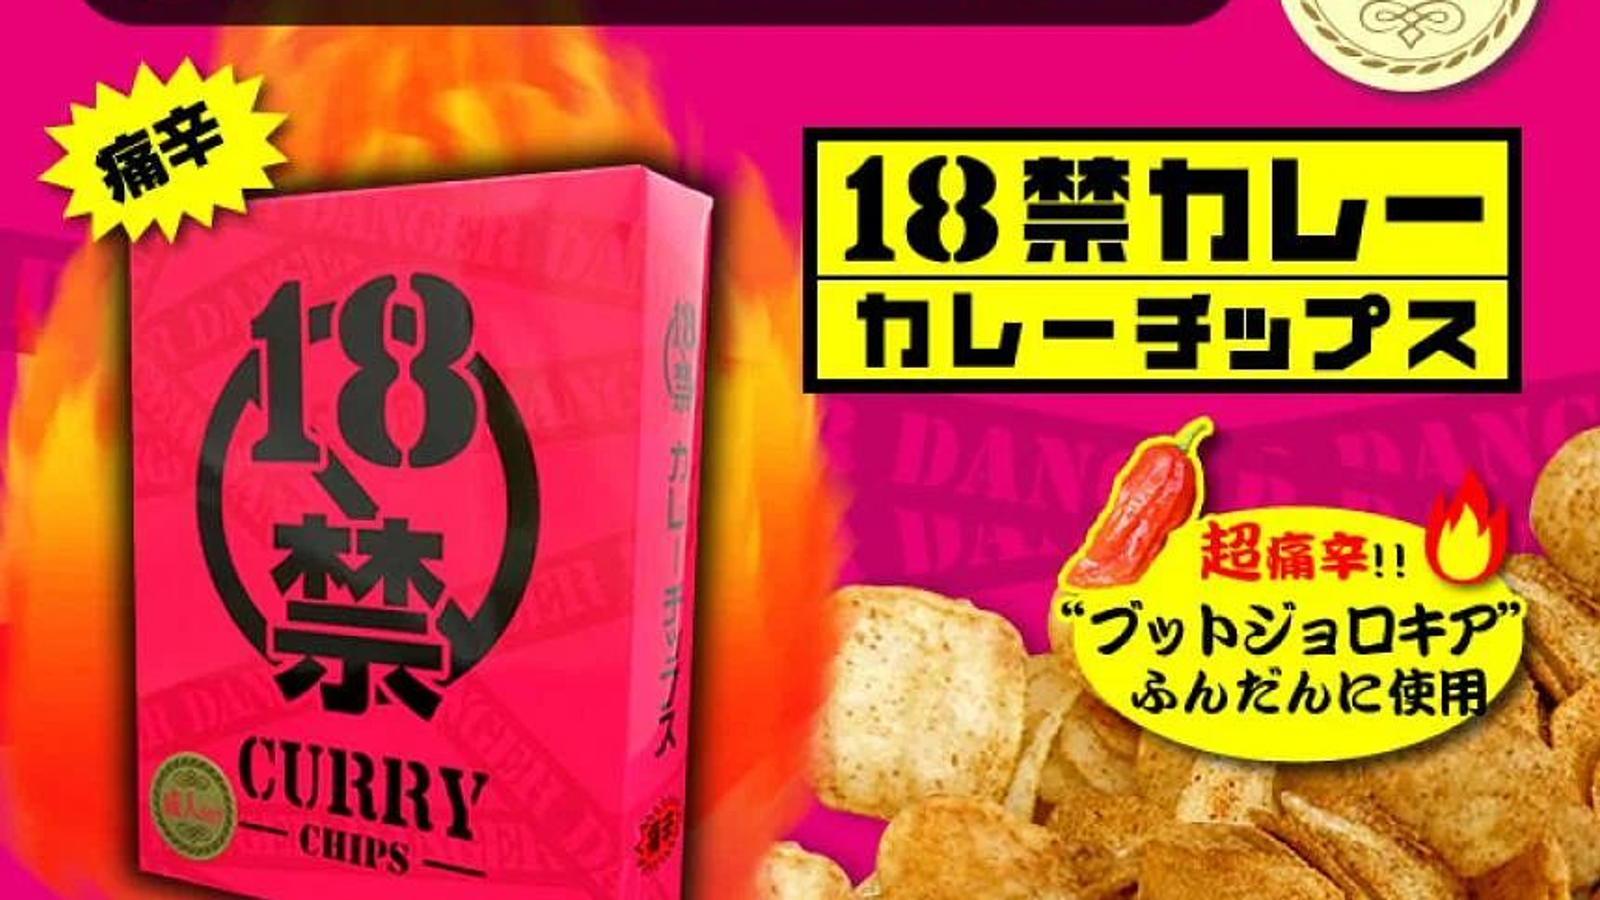 High school students in Japan taken to hospital after eating 'super spicy' crisps